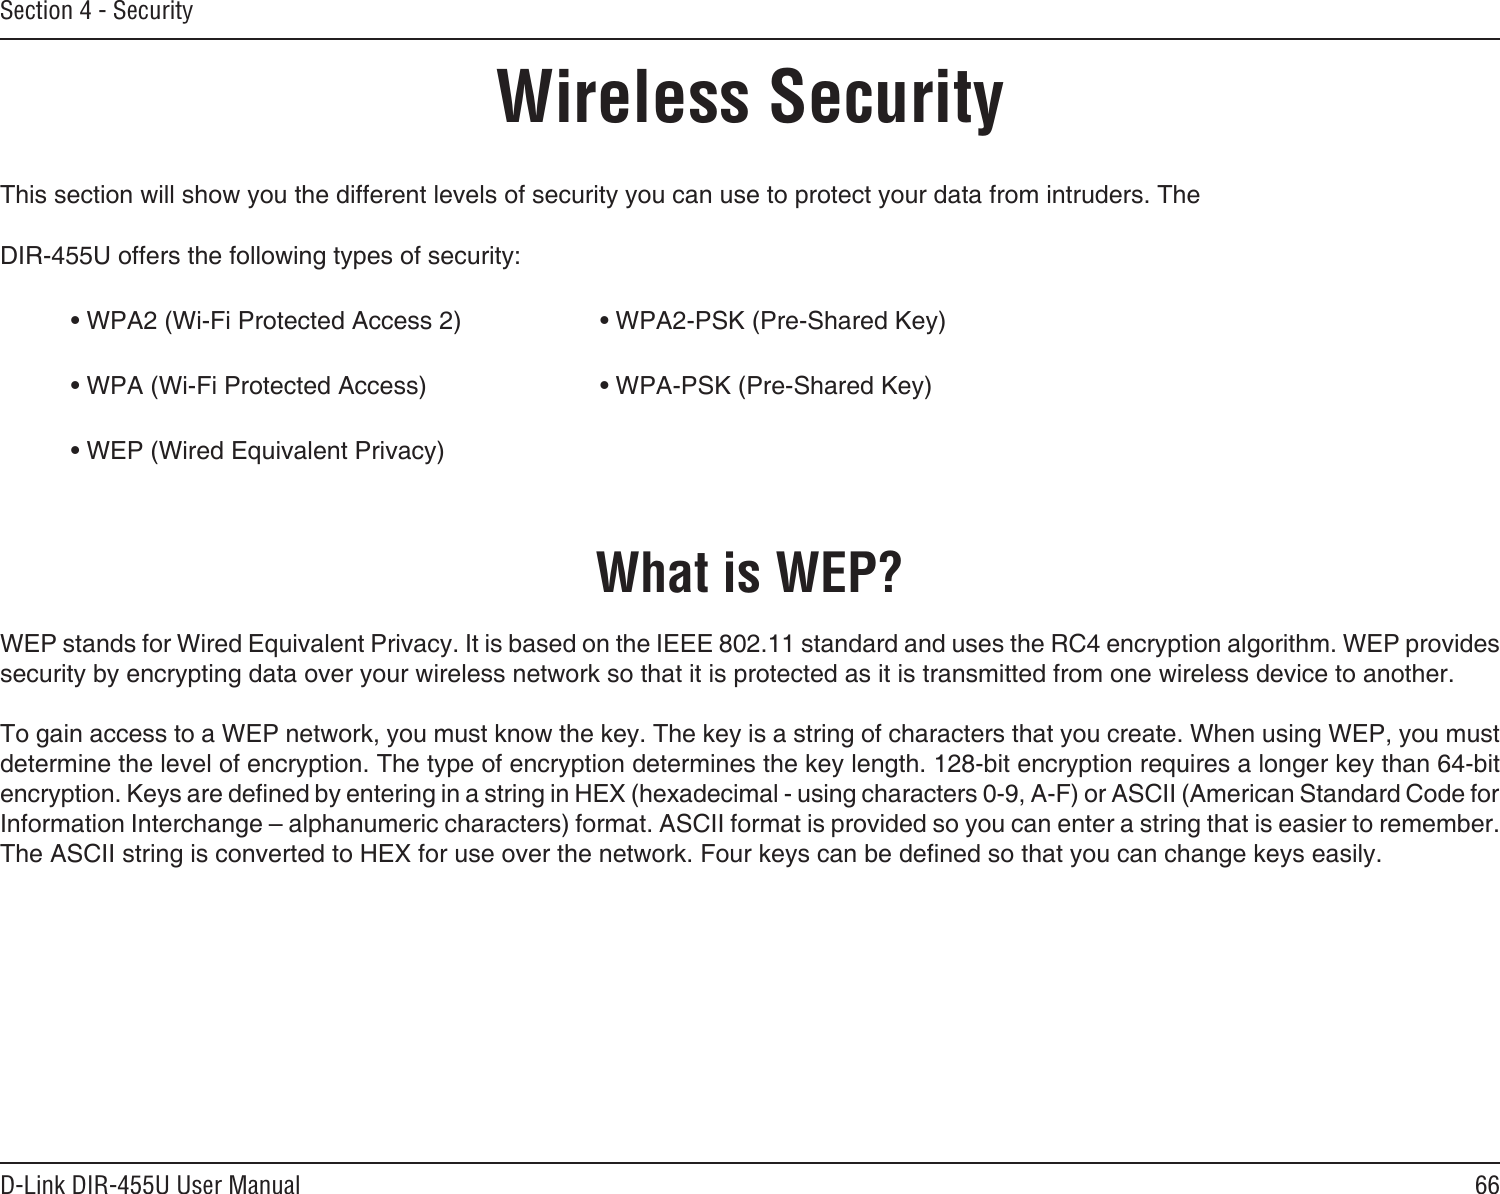 66D-Link DIR-455U User ManualSection 4 - SecurityWireless SecurityThis section will show you the different levels of security you can use to protect your data from intruders. The DIR-455U offers the following types of security:• WPA2 (Wi-Fi Protected Access 2)     • WPA2-PSK (Pre-Shared Key)• WPA (Wi-Fi Protected Access)      • WPA-PSK (Pre-Shared Key)• WEP (Wired Equivalent Privacy)What is WEP?WEP stands for Wired Equivalent Privacy. It is based on the IEEE 802.11 standard and uses the RC4 encryption algorithm. WEP provides security by encrypting data over your wireless network so that it is protected as it is transmitted from one wireless device to another.To gain access to a WEP network, you must know the key. The key is a string of characters that you create. When using WEP, you must determine the level of encryption. The type of encryption determines the key length. 128-bit encryption requires a longer key than 64-bit encryption. Keys are dened by entering in a string in HEX (hexadecimal - using characters 0-9, A-F) or ASCII (American Standard Code for Information Interchange – alphanumeric characters) format. ASCII format is provided so you can enter a string that is easier to remember. The ASCII string is converted to HEX for use over the network. Four keys can be dened so that you can change keys easily.